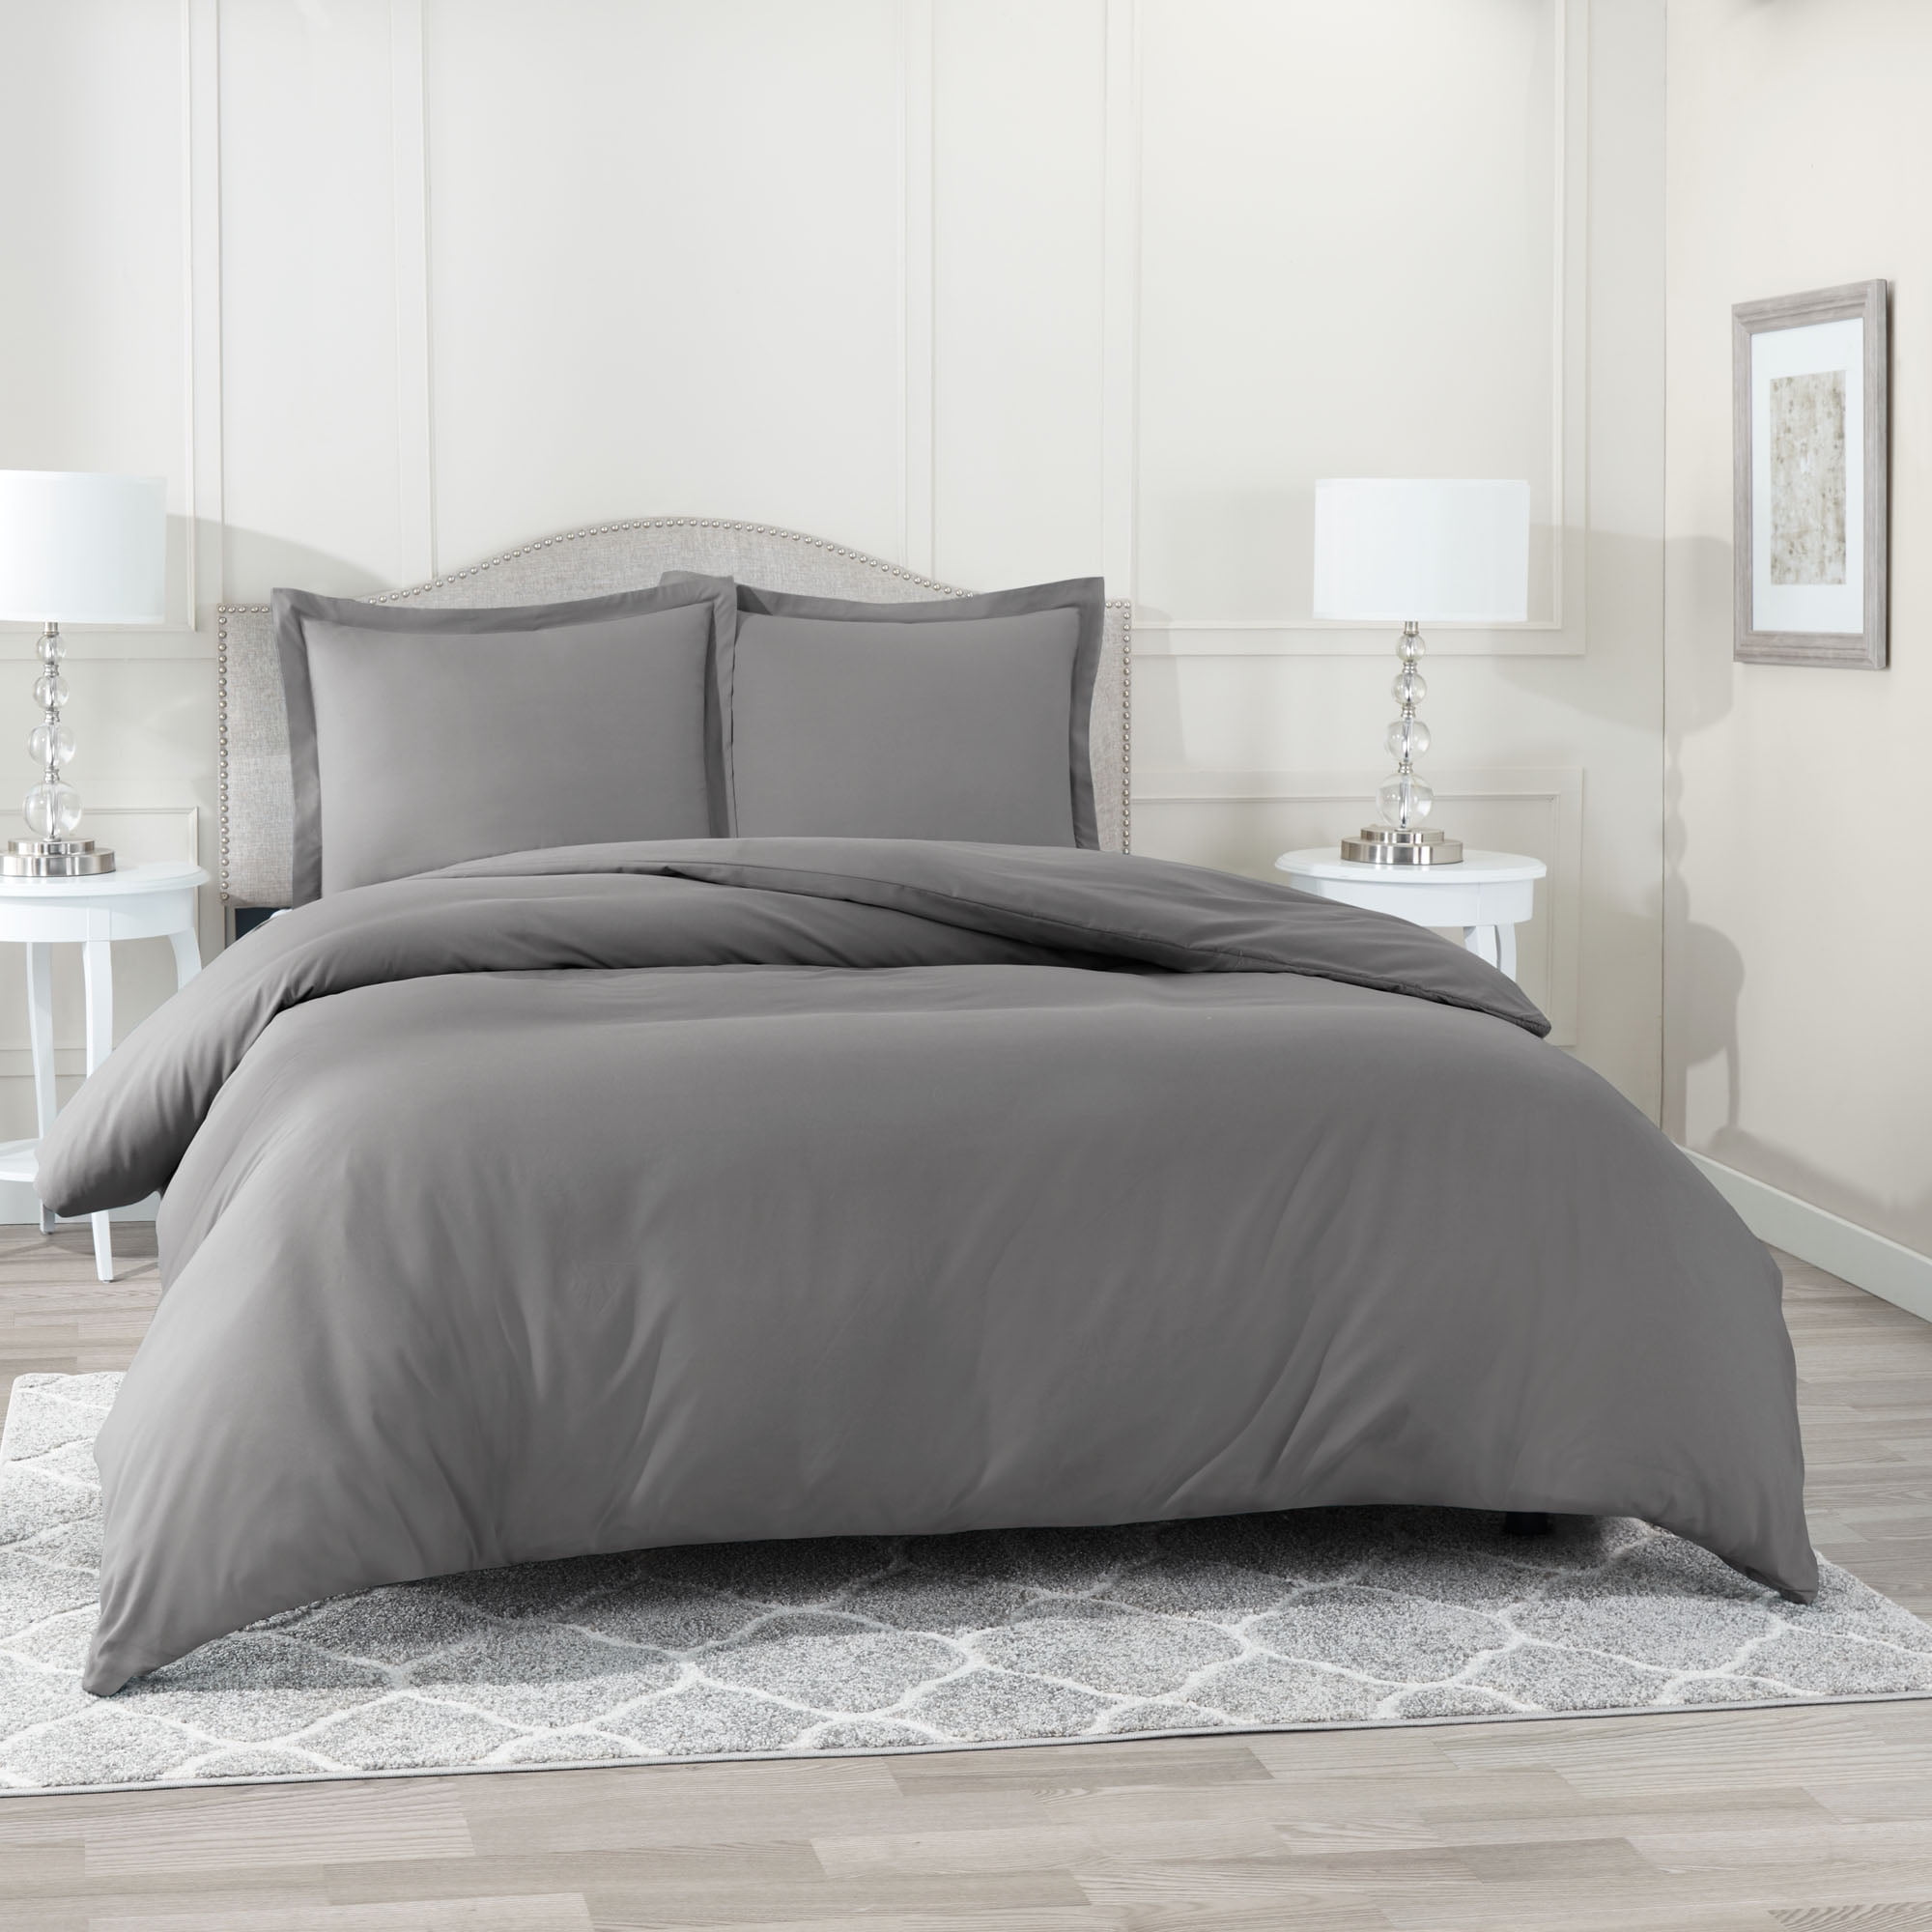 Luxury Bedding Duvet Cover, Grey Quilted Duvet Cover